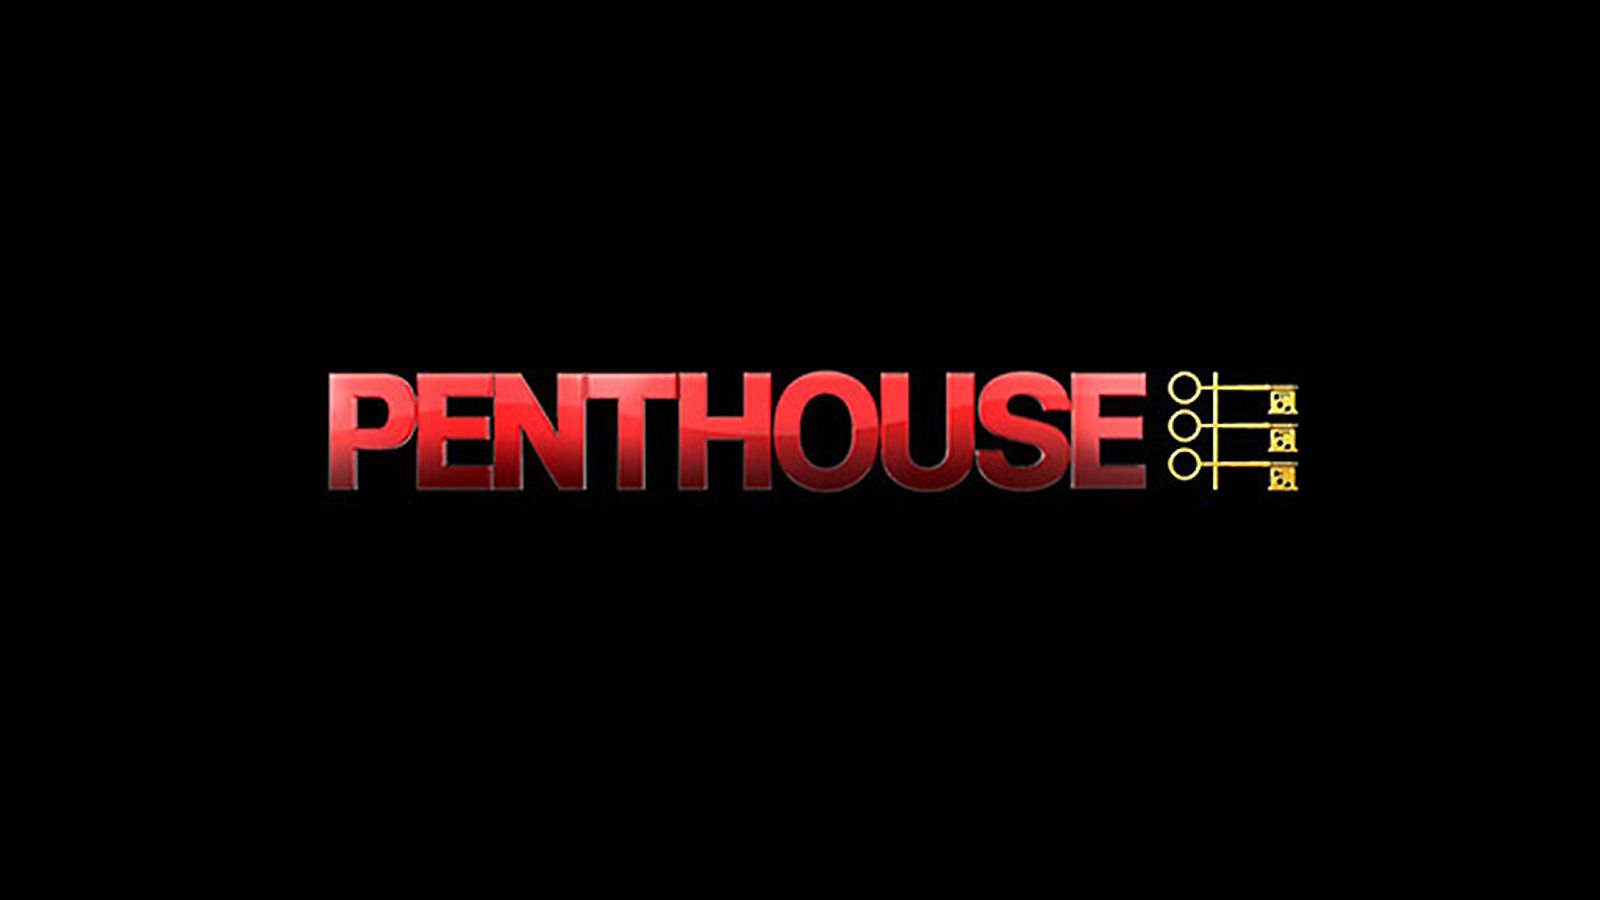 Penthouse Bankruptcy Auction Results in New Ownership